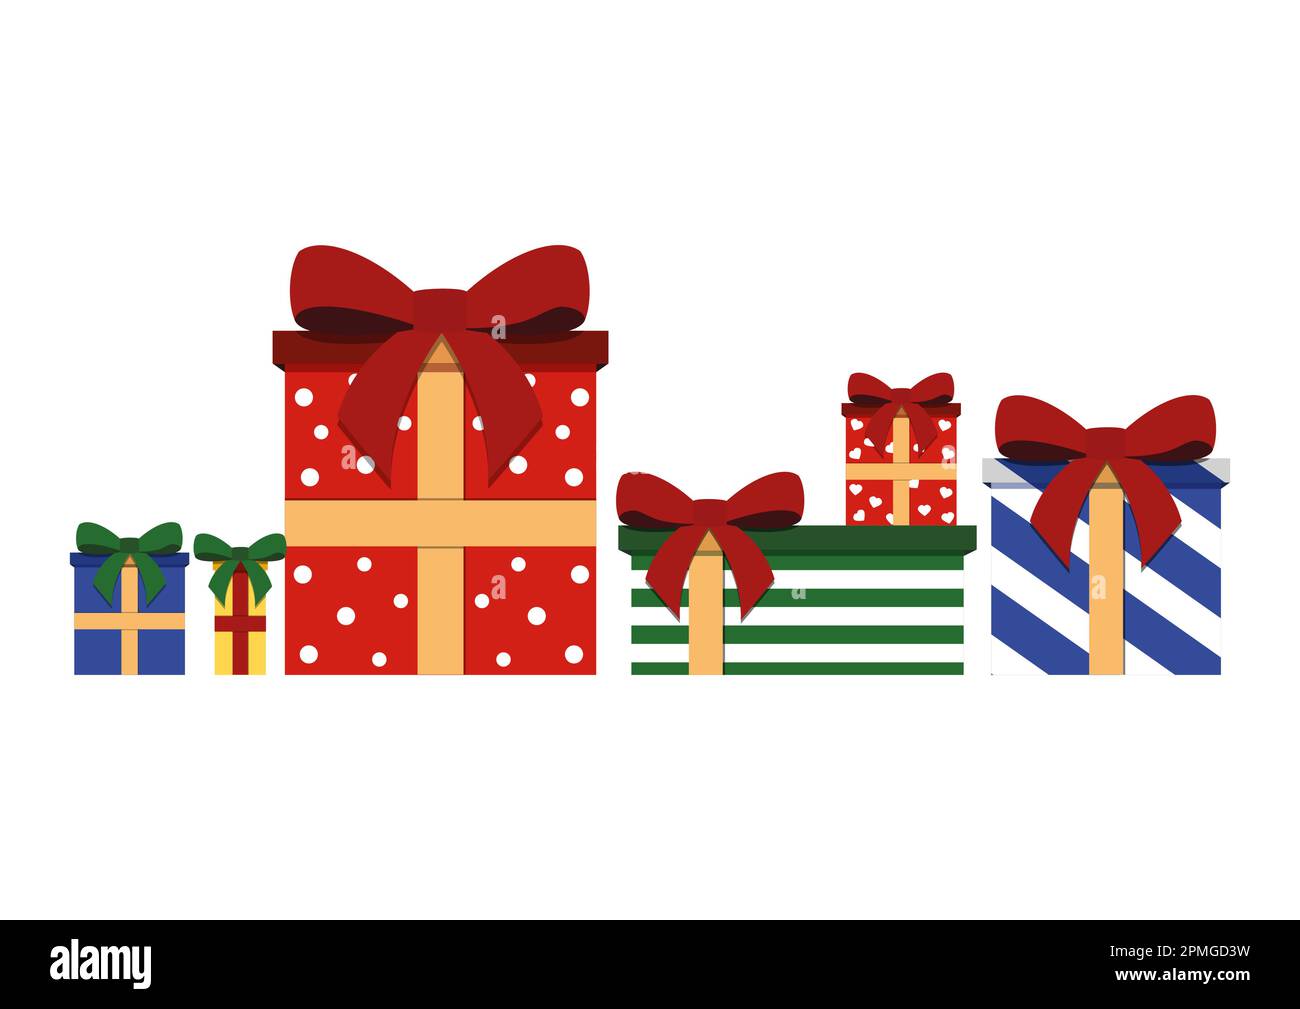 https://c8.alamy.com/comp/2PMGD3W/christmas-gifts-on-white-background-vector-christmas-presents-on-flat-style-2PMGD3W.jpg